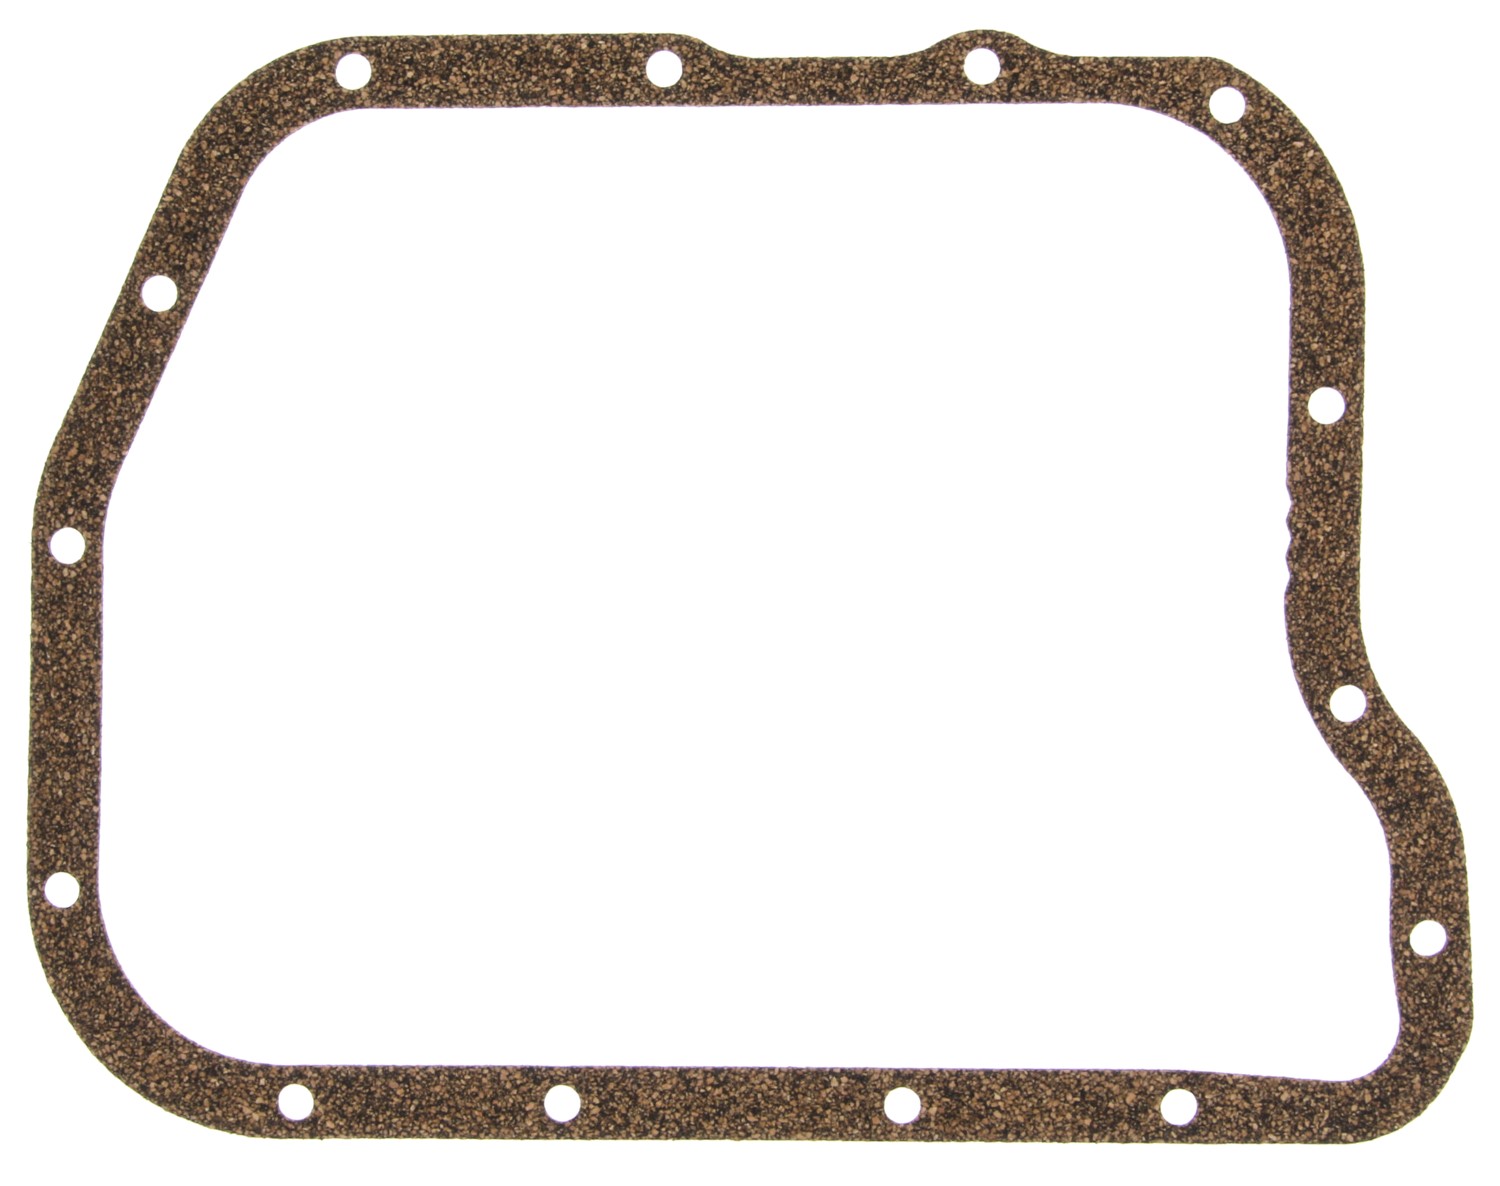 Mahle Automatic Transmission Oil Pan Gasket W39003 - image 1 of 2